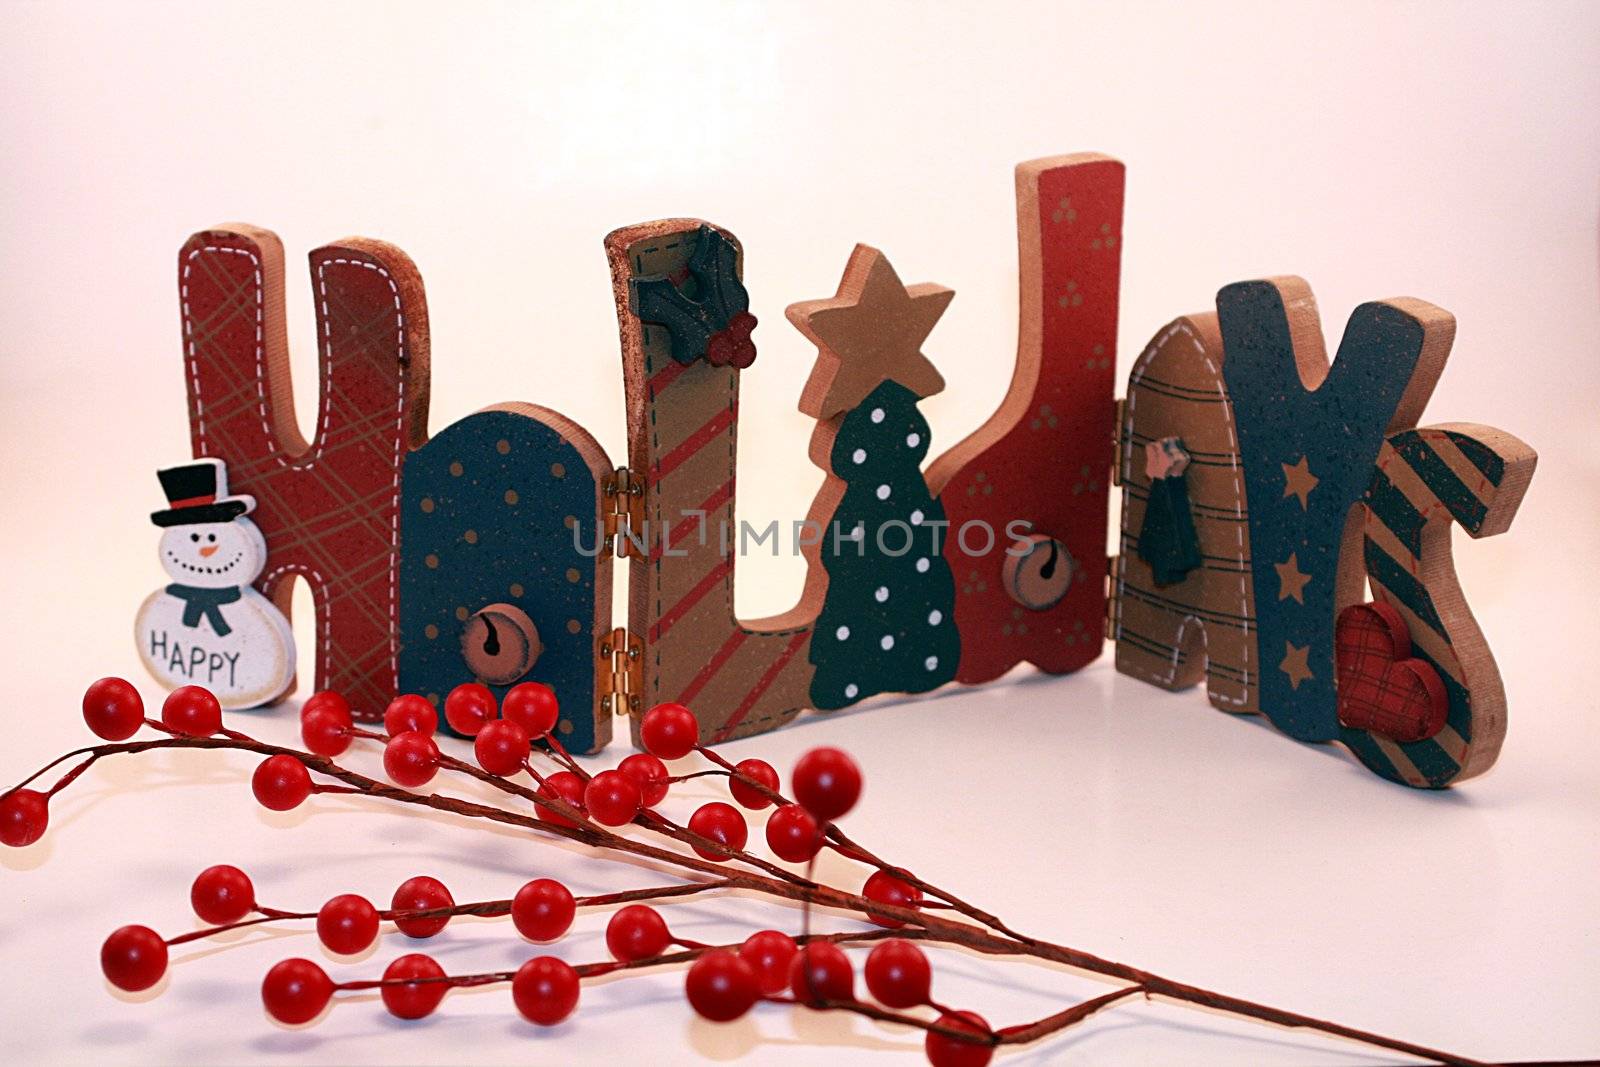 Holidays Sign with Holly Berries for Christmas by knktucker